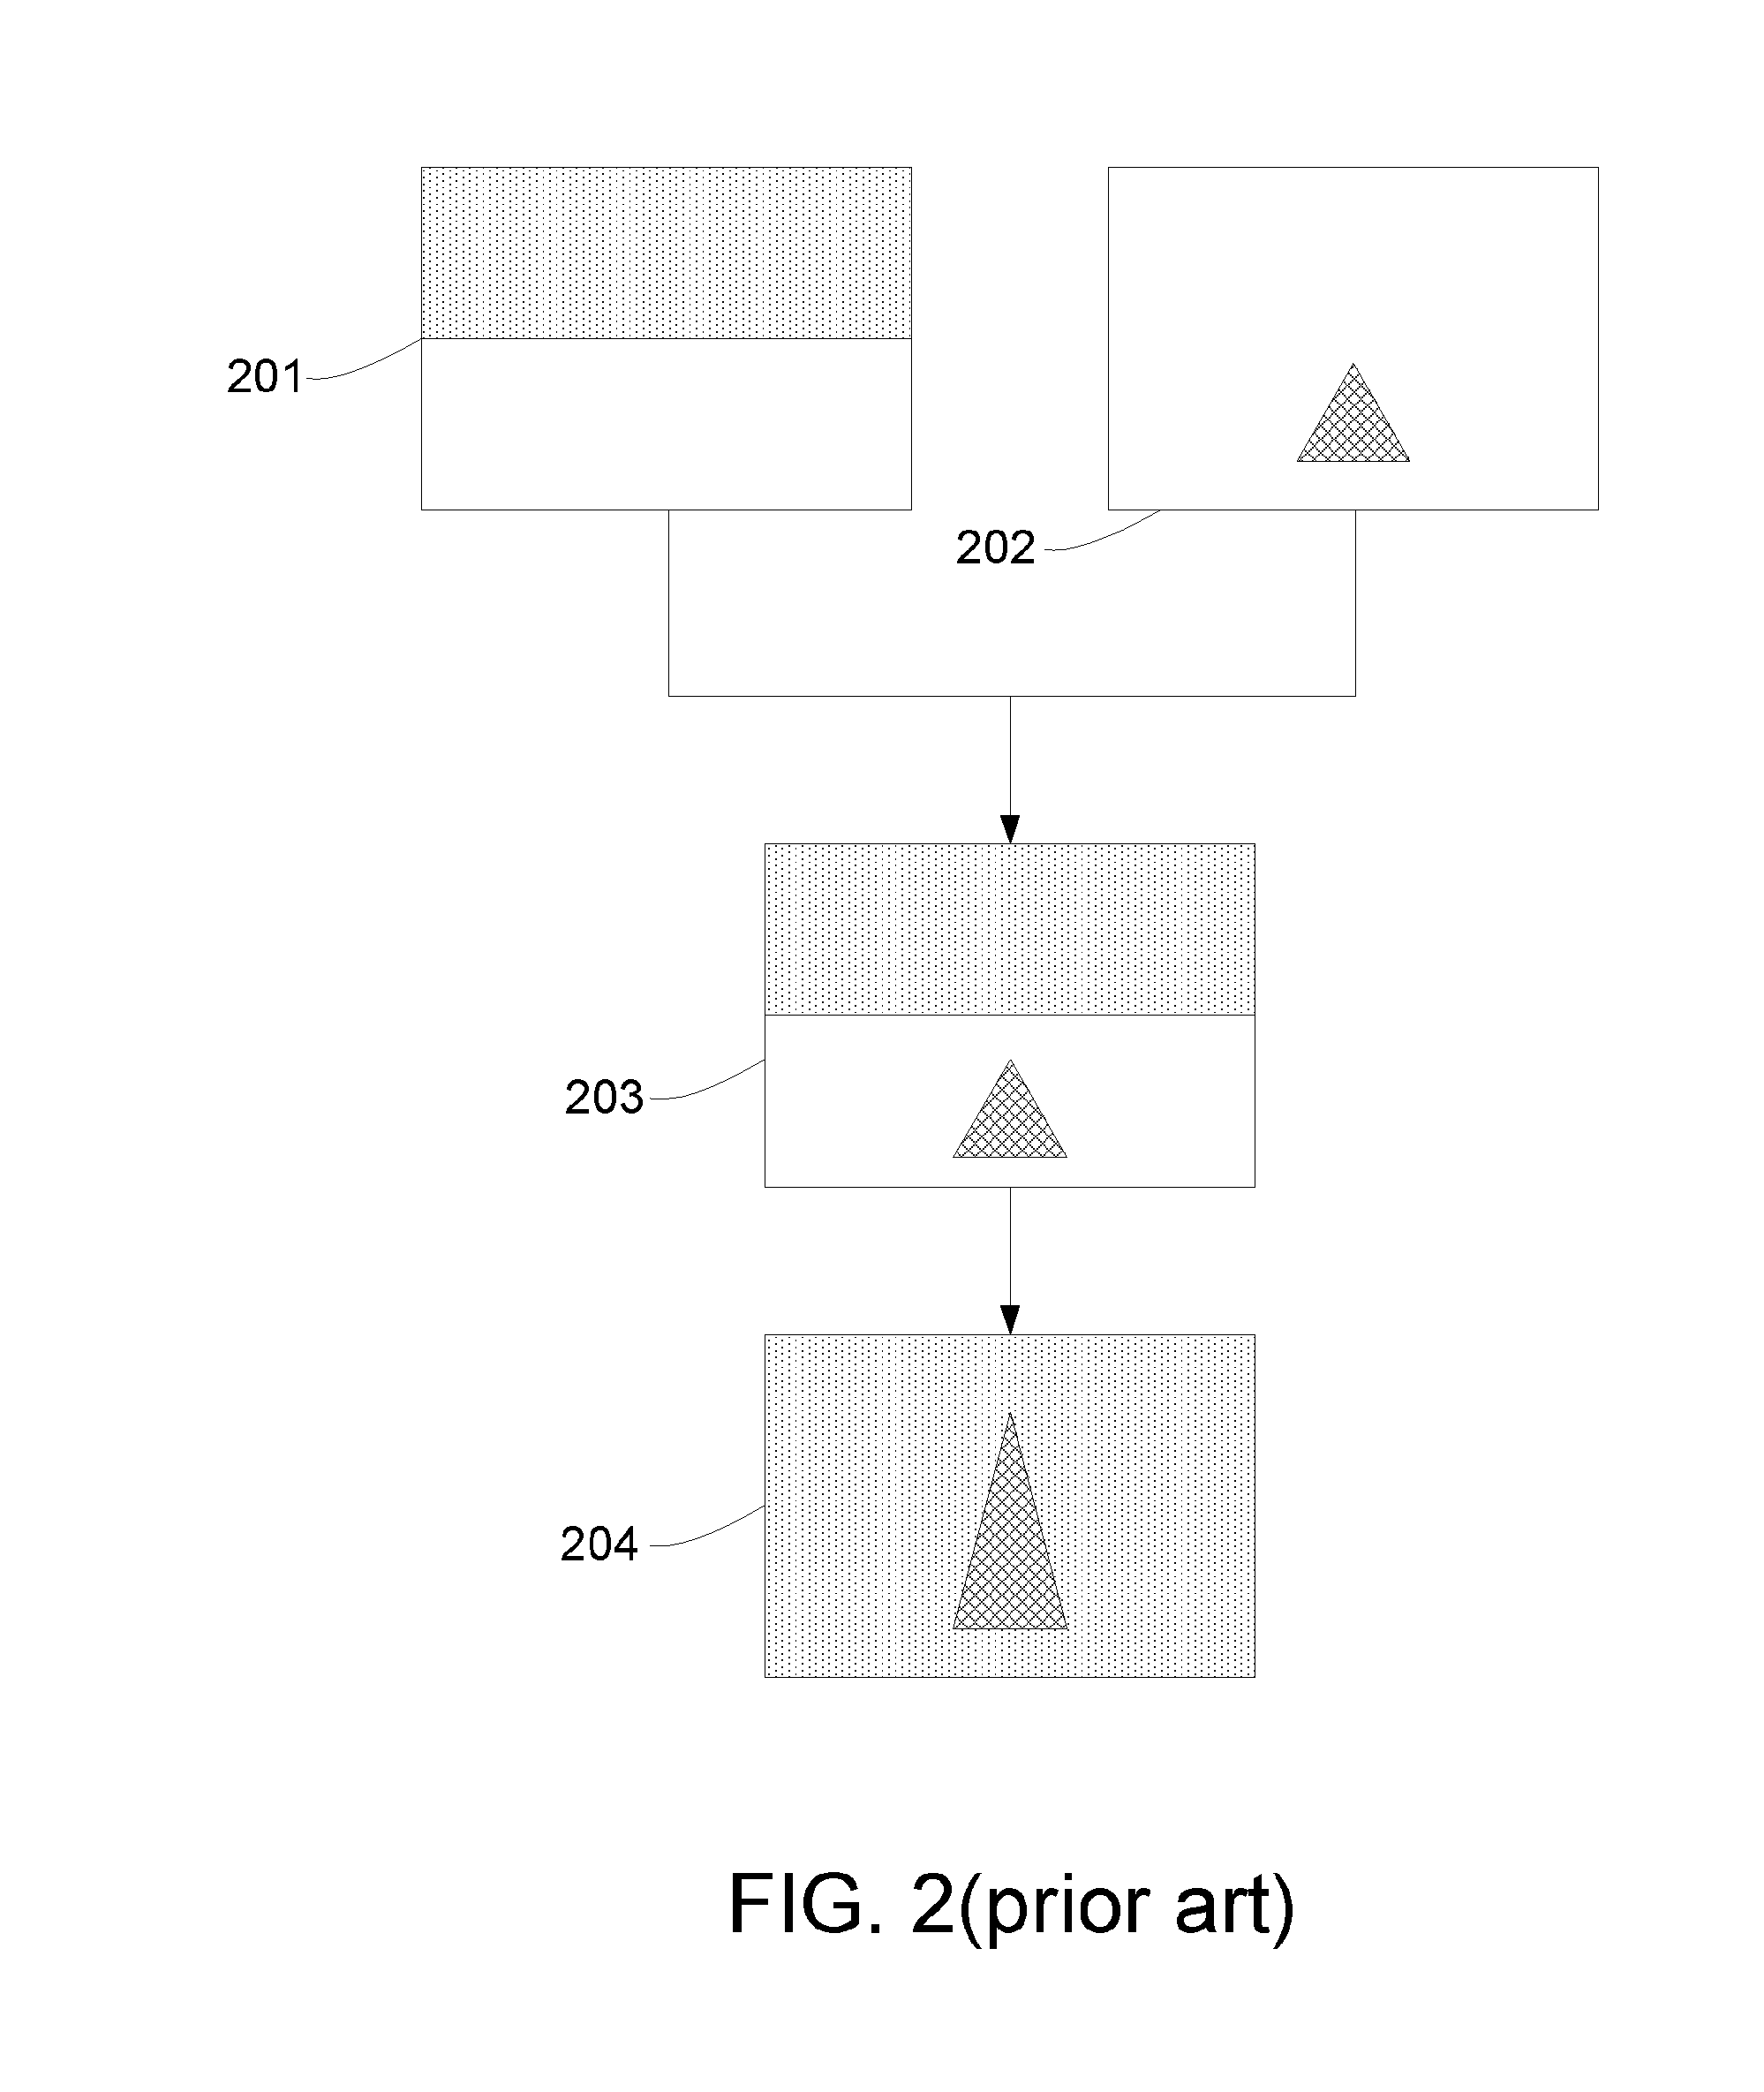 3D user interface display system and method